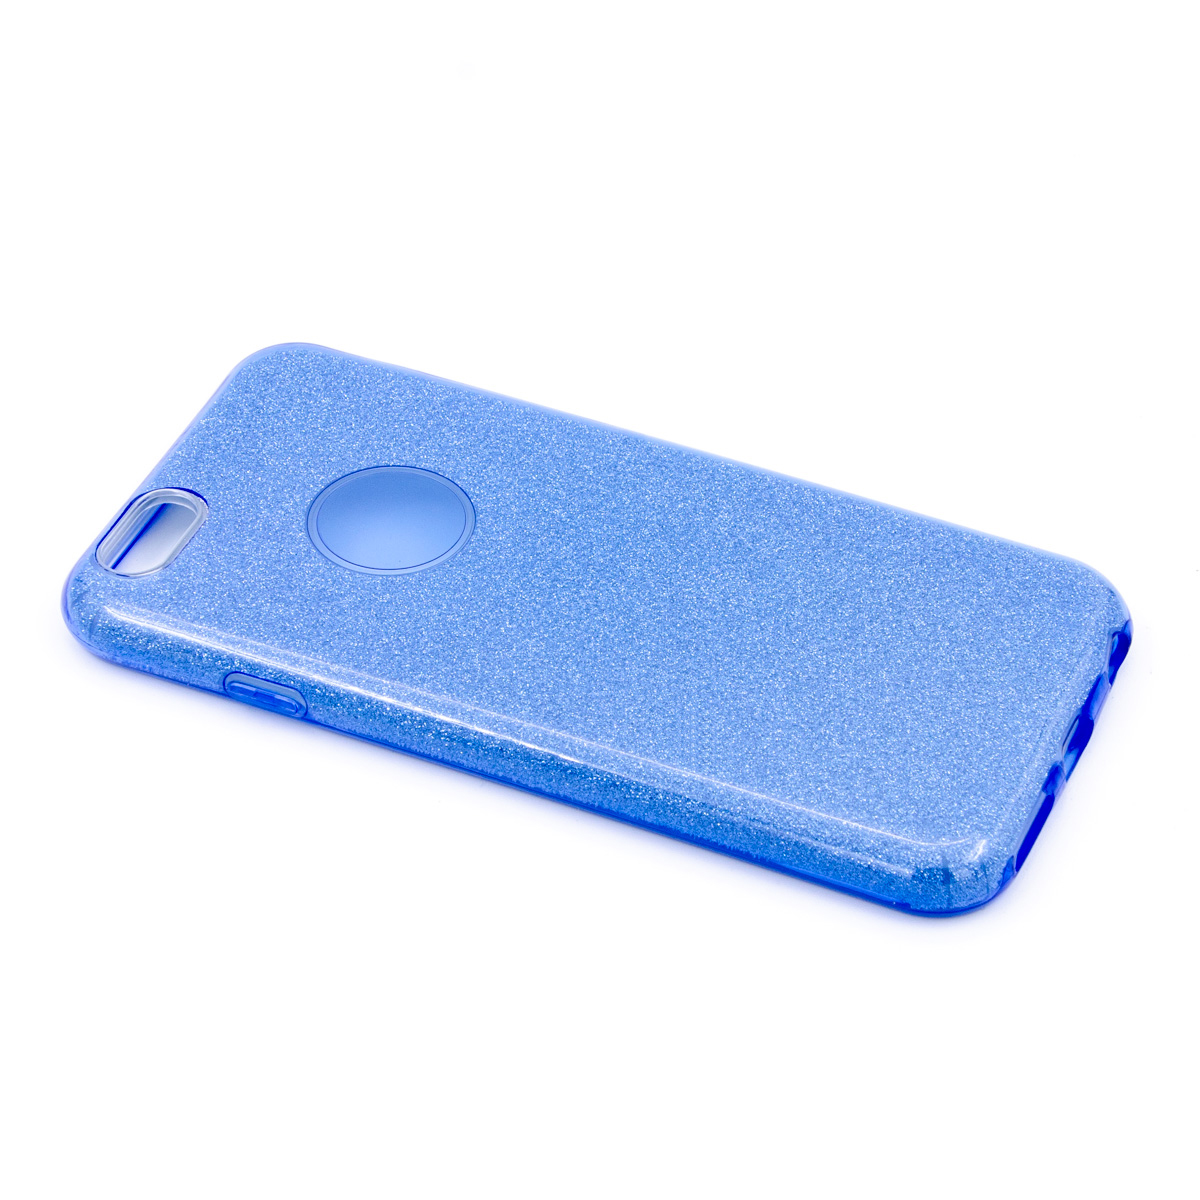 Tpu sparkly shine for iphone 6 (4.7") blue